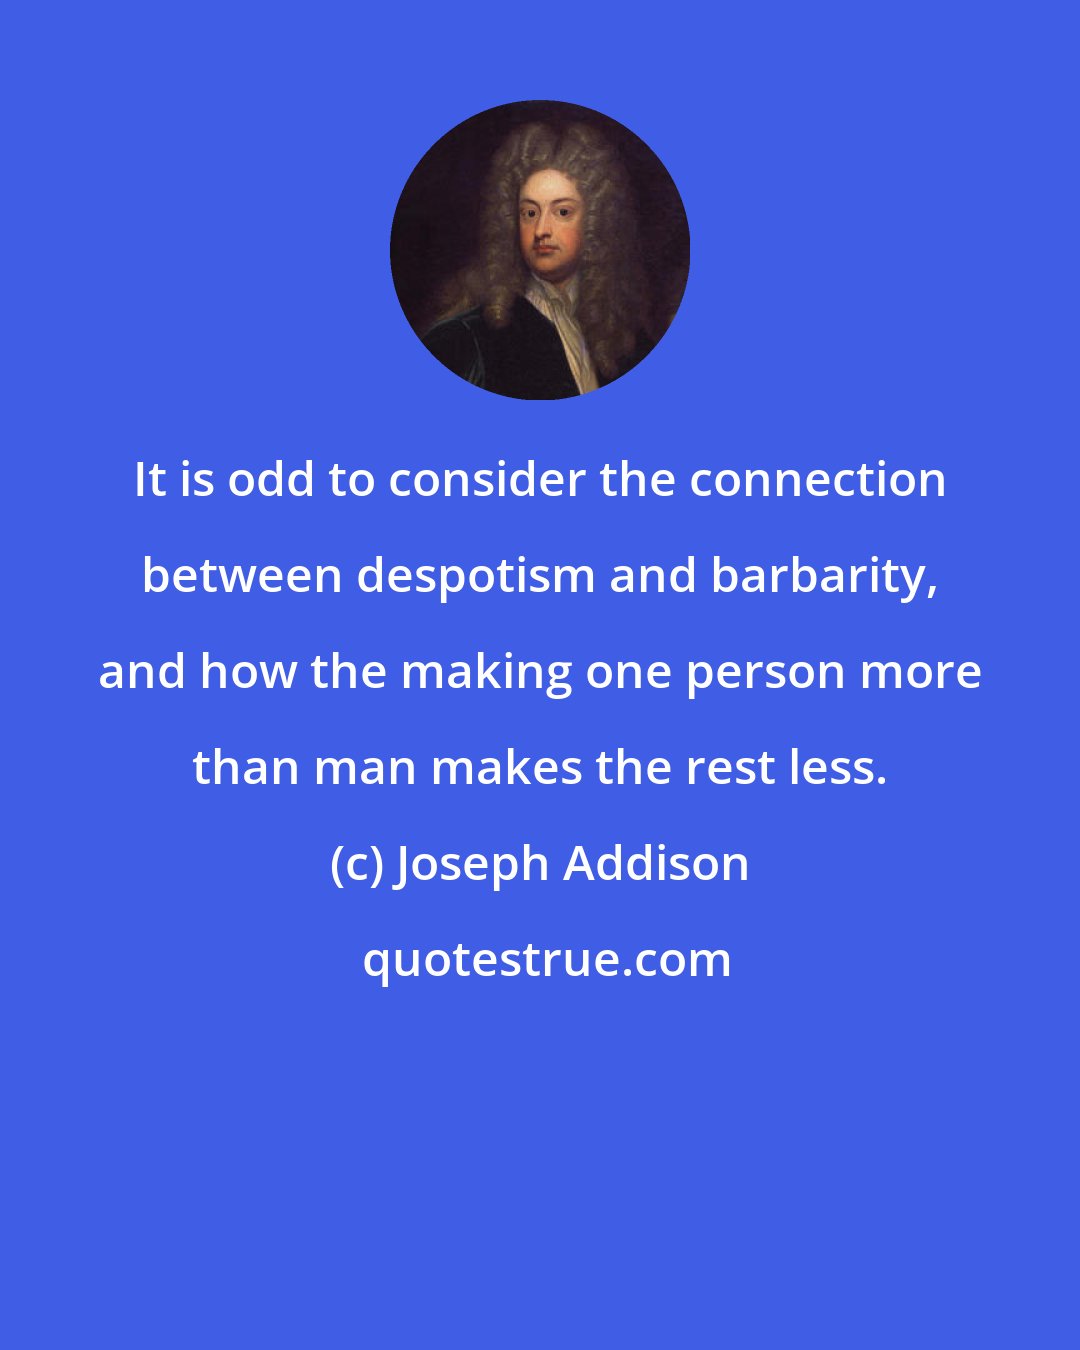 Joseph Addison: It is odd to consider the connection between despotism and barbarity, and how the making one person more than man makes the rest less.